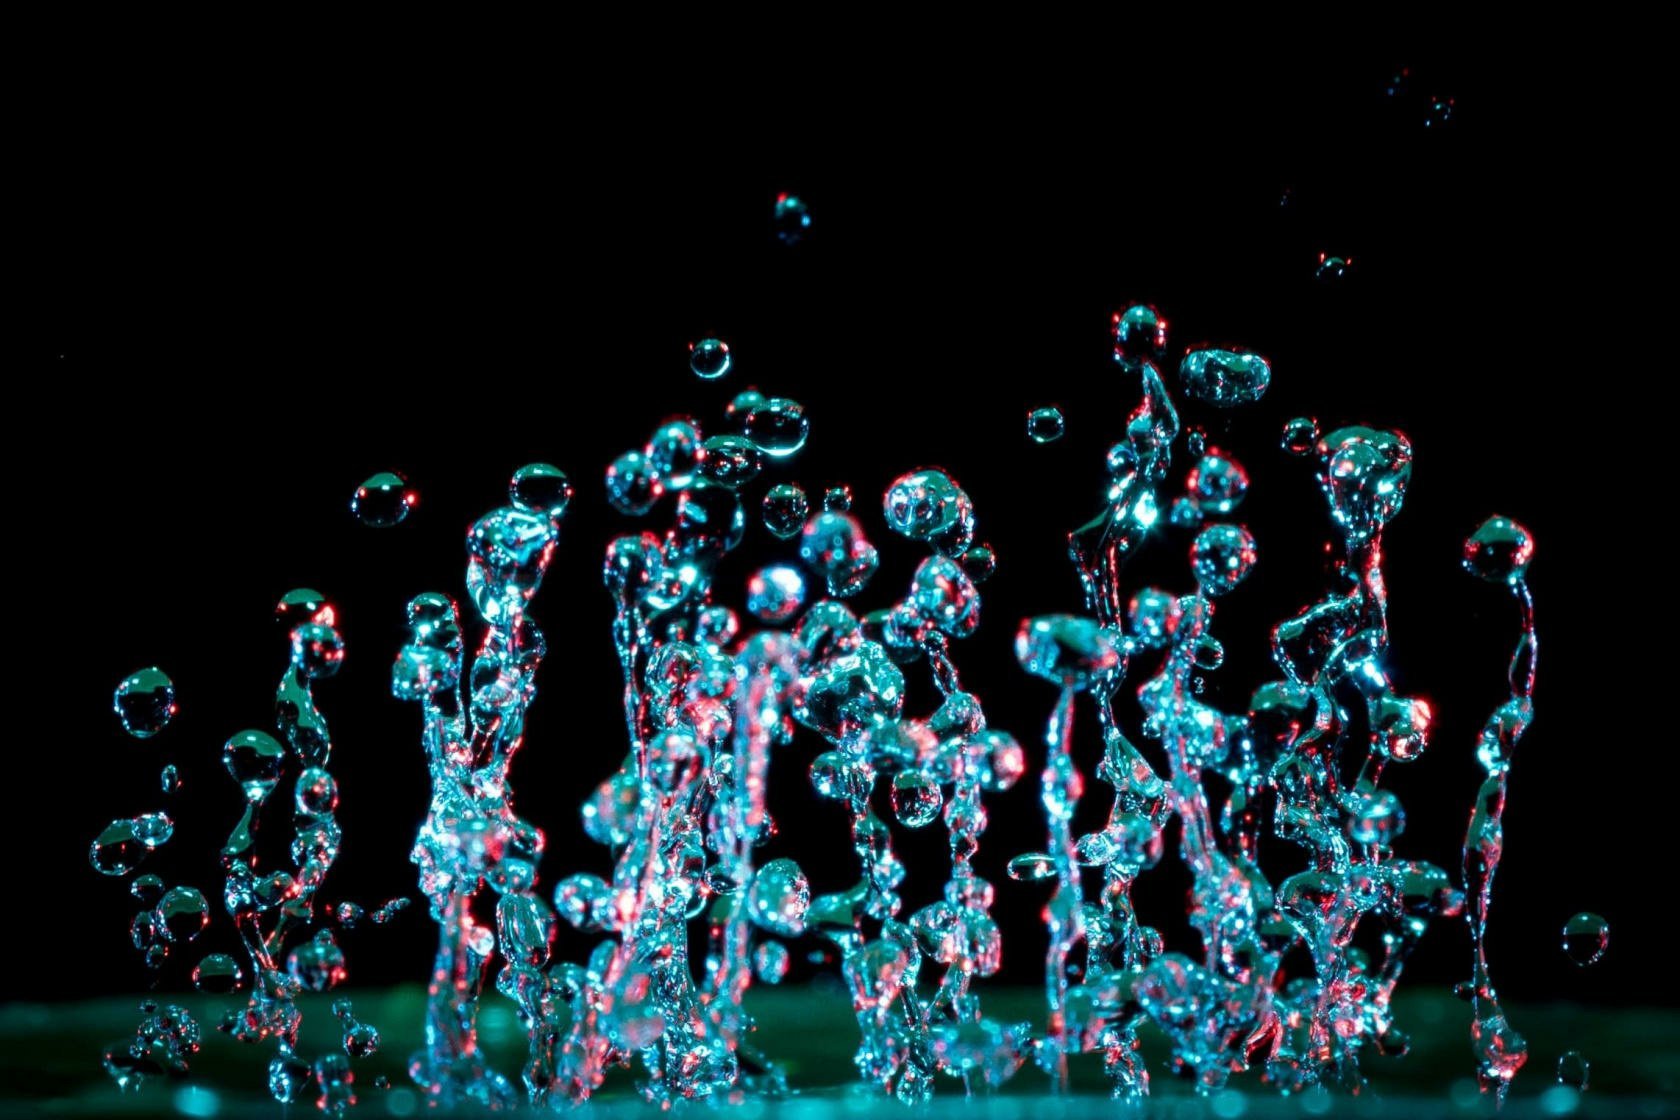 How To Create And Photograph Colorful Figures With Water Drops - 500px